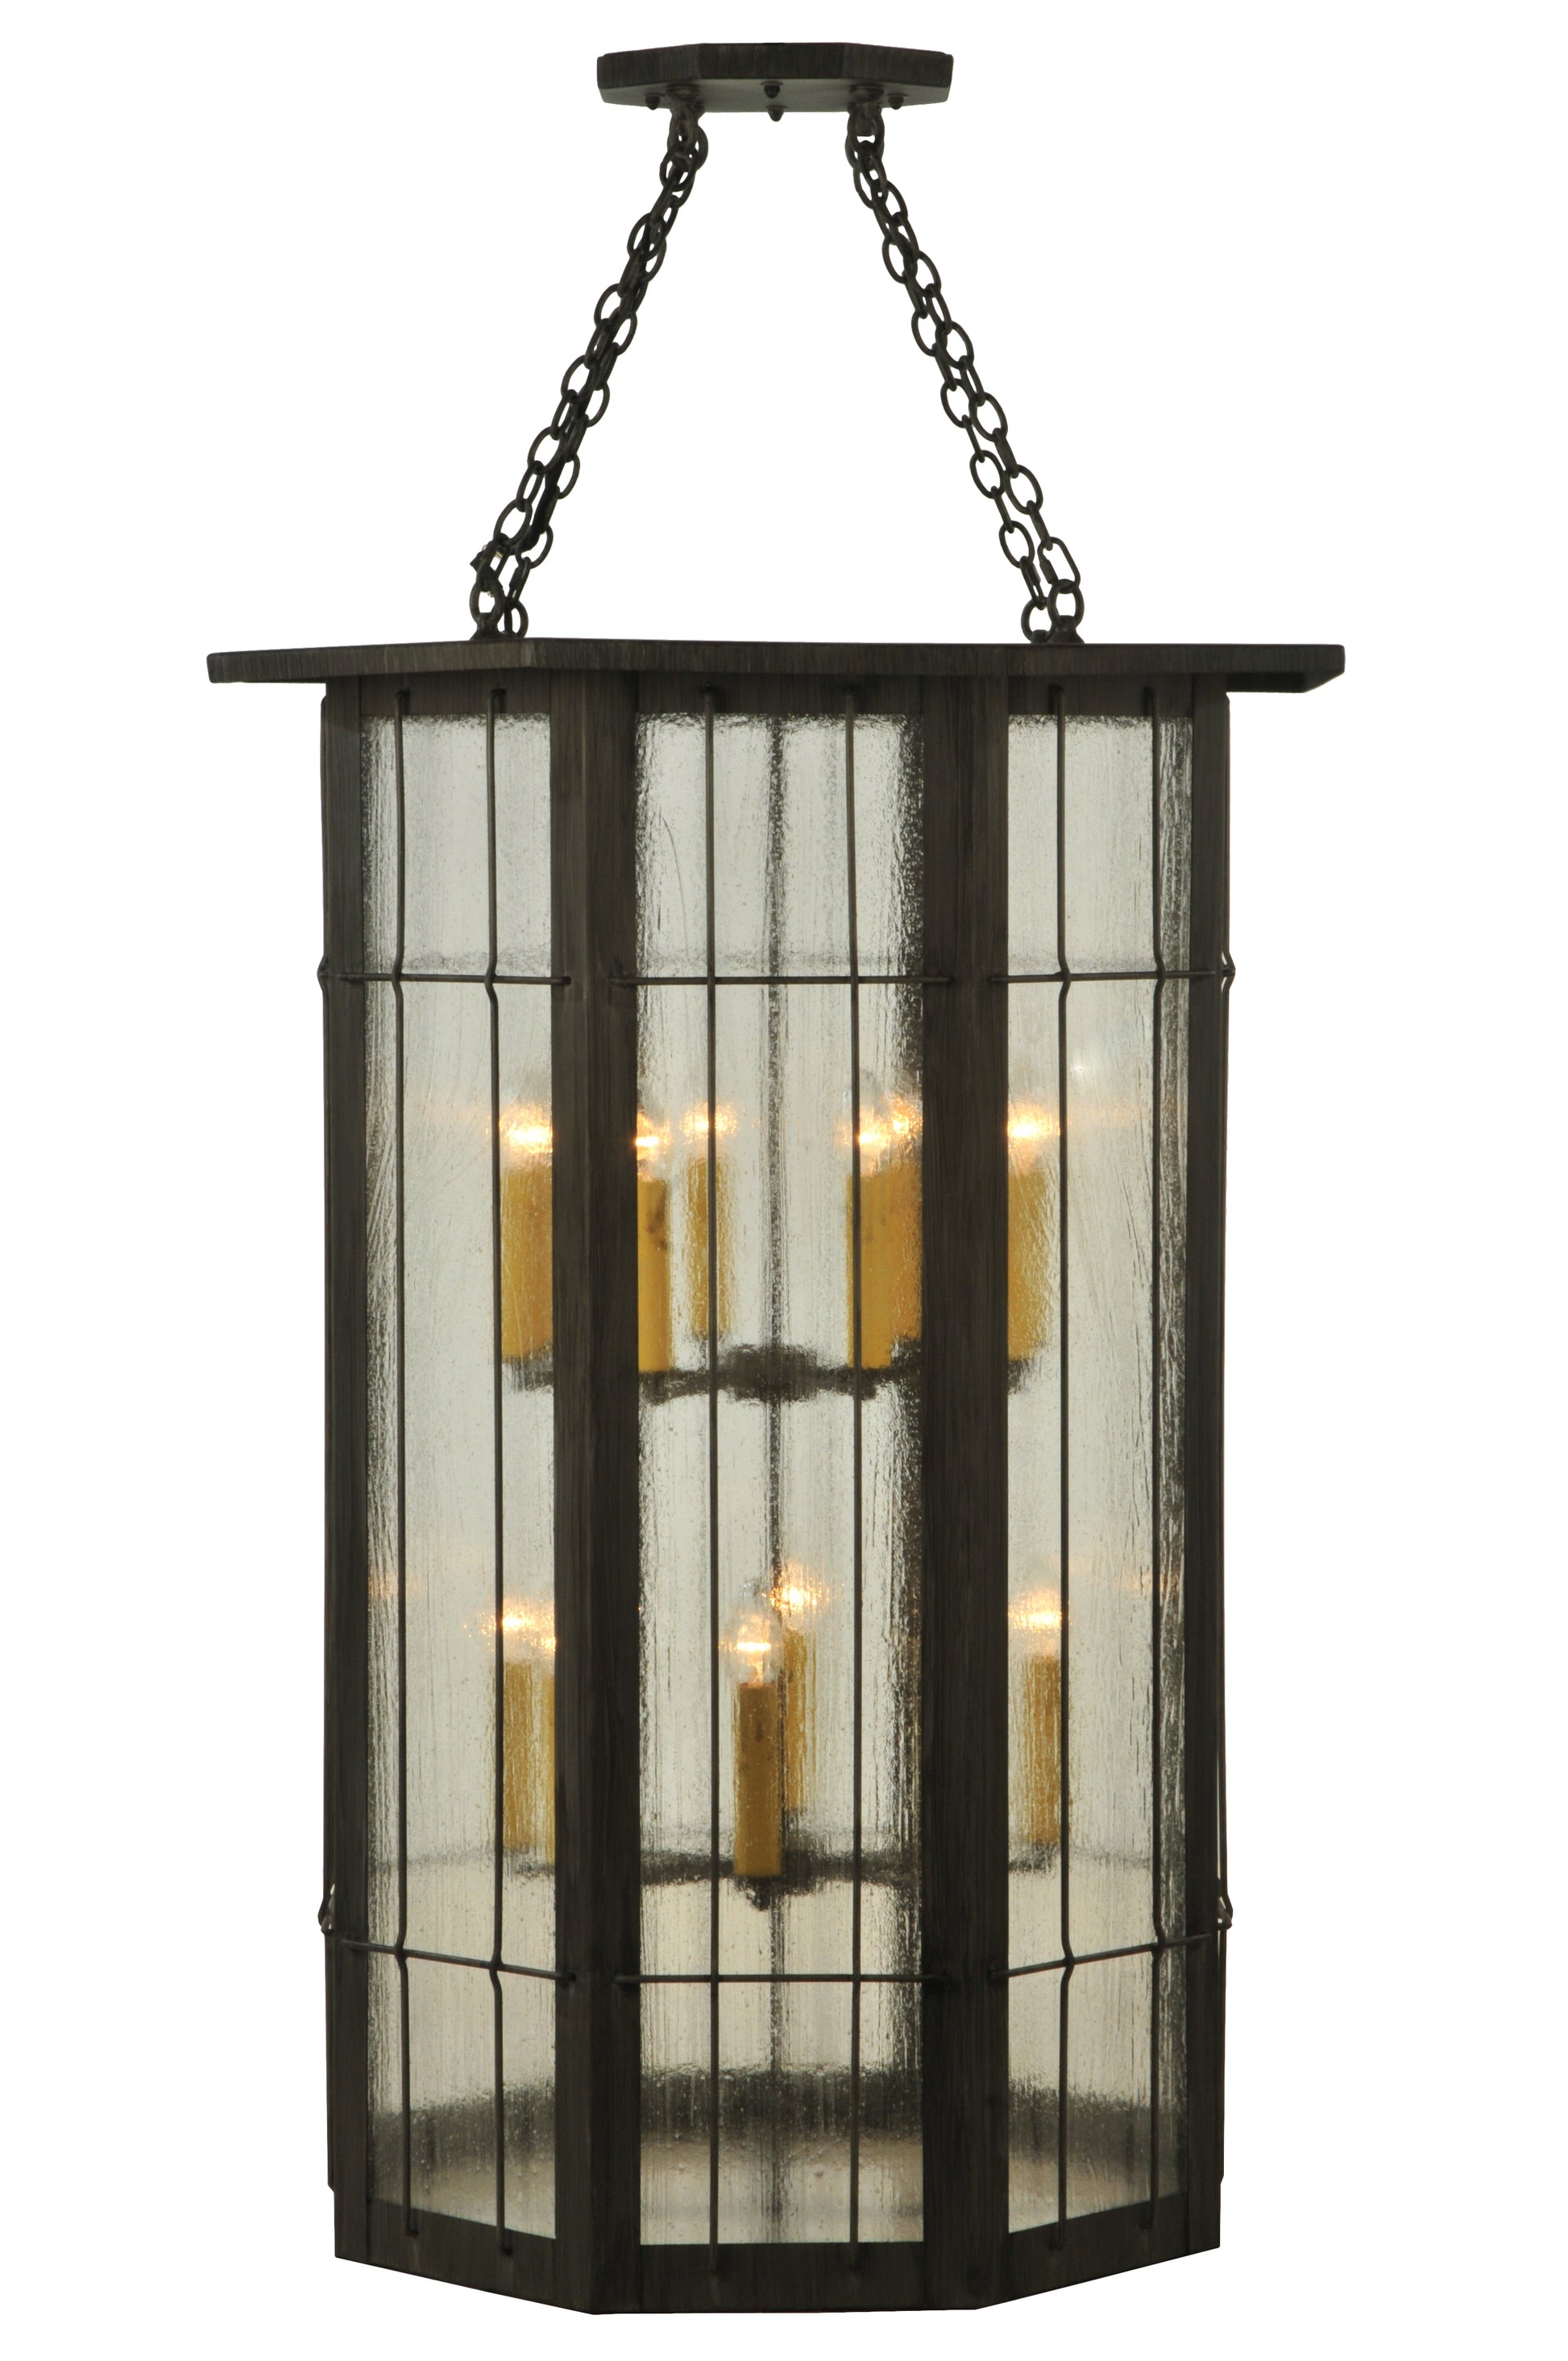 38" West Albany 16-Light Pendant by 2nd Ave Lighting